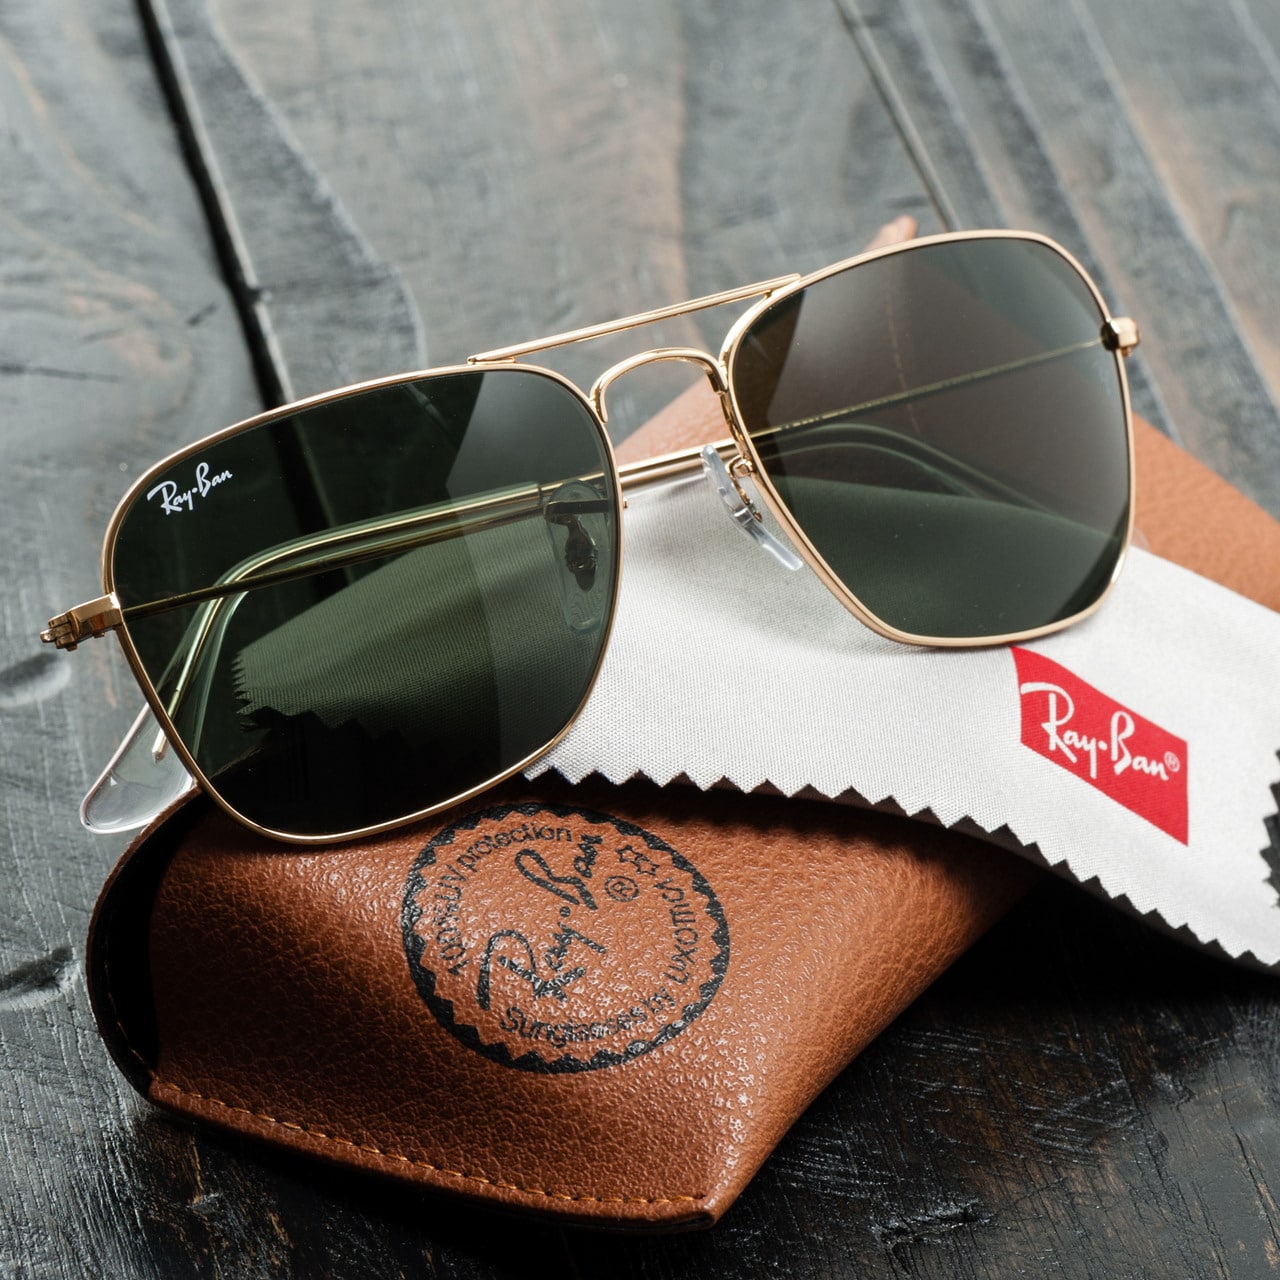 The 10 Best Ray-Bans for Narrow Faces - The Modest Man